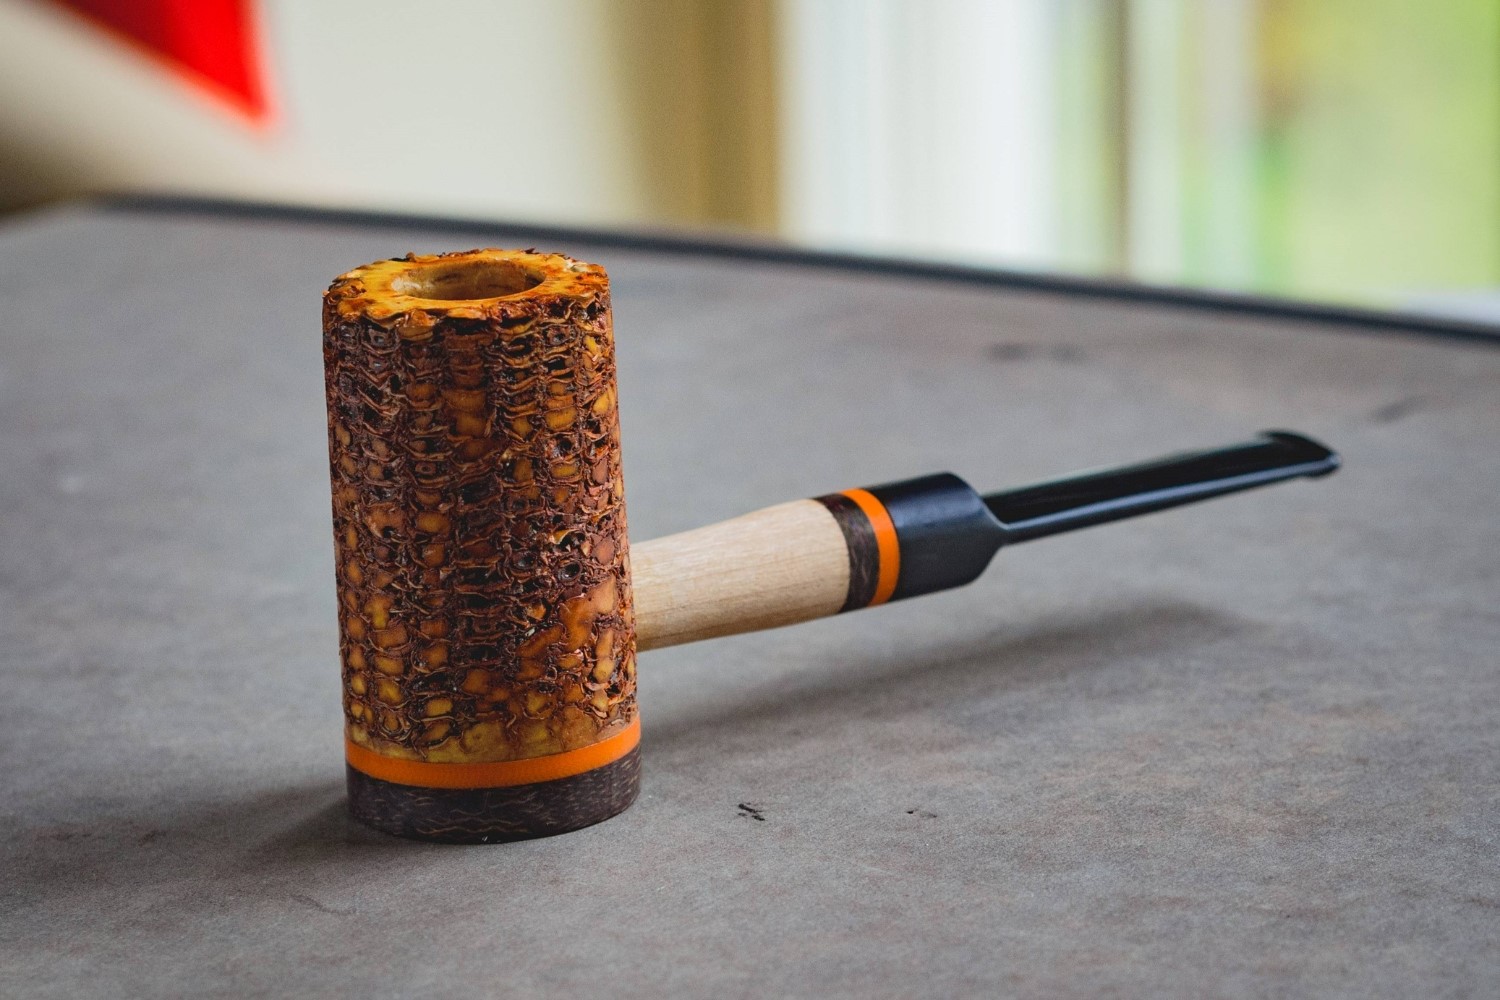 Master The Art Of Crafting A Corn Cob Pipe With Just The Cob!